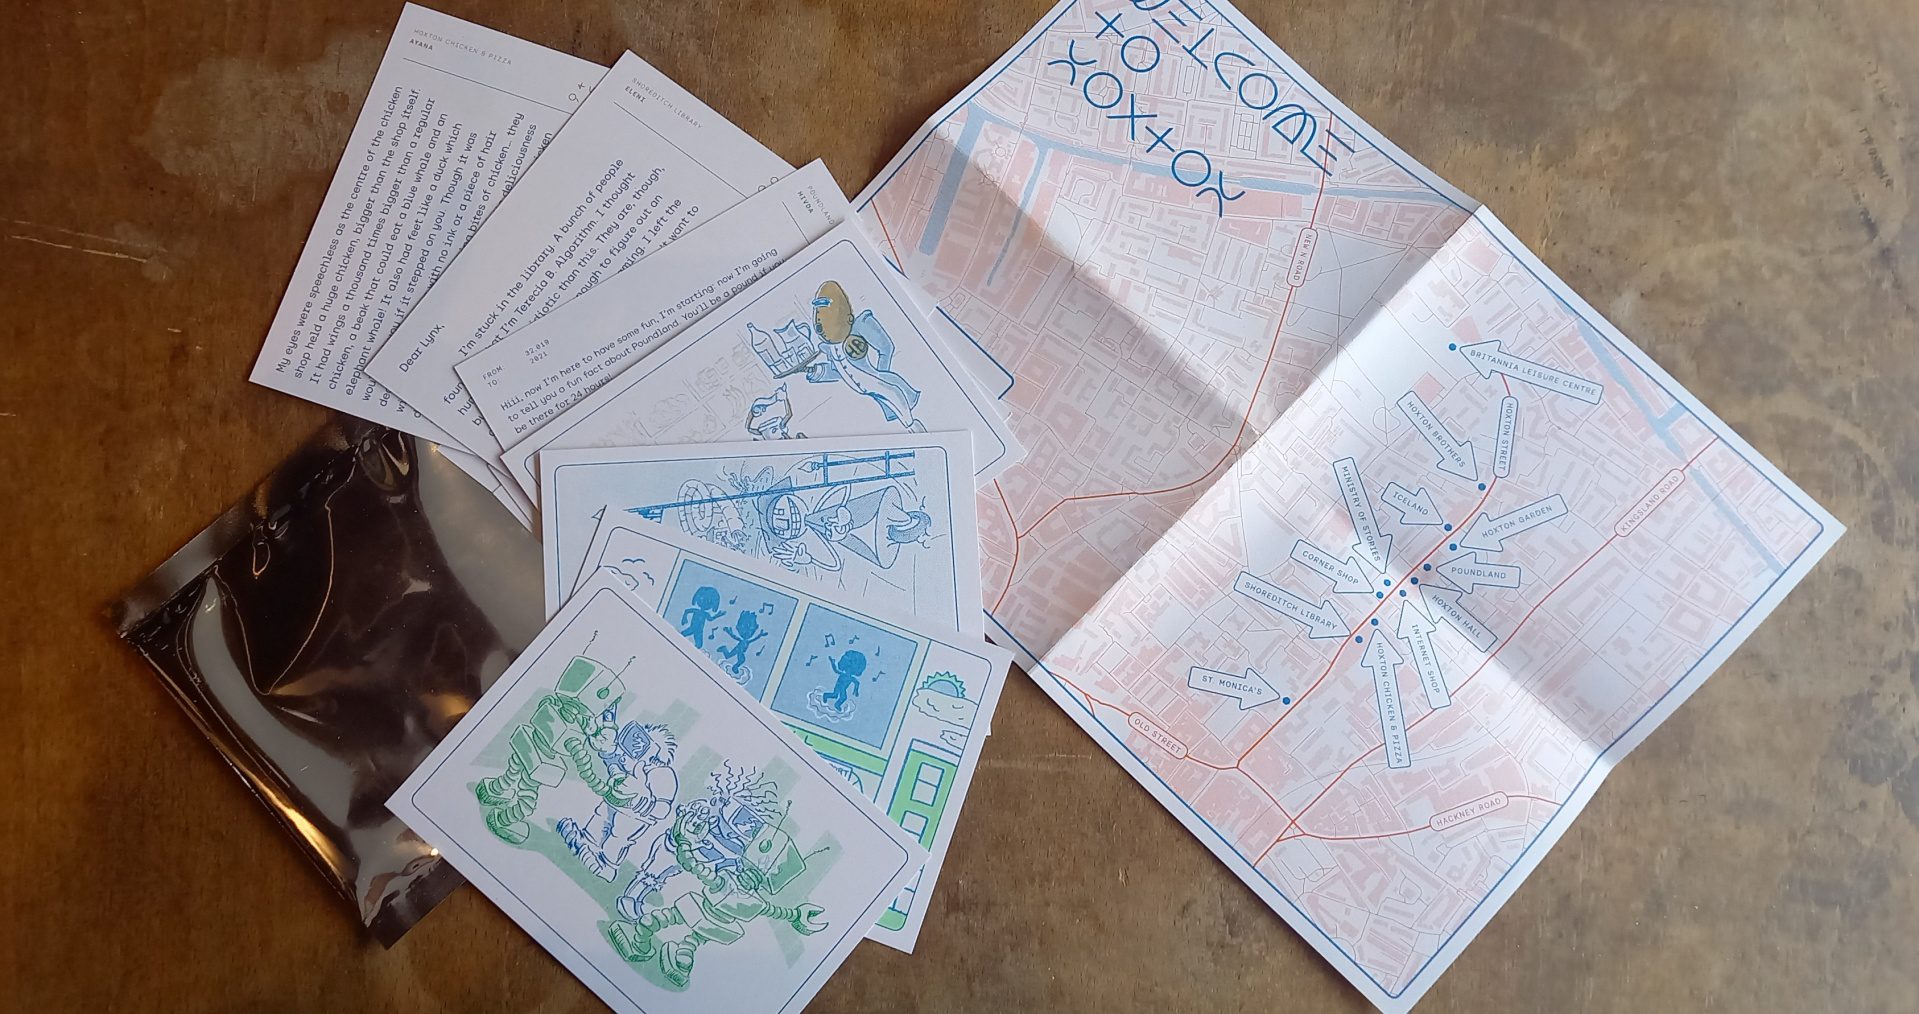 A pack of white postcards with bright, repo graphics is laid next to a map of a similar design on a wooden table